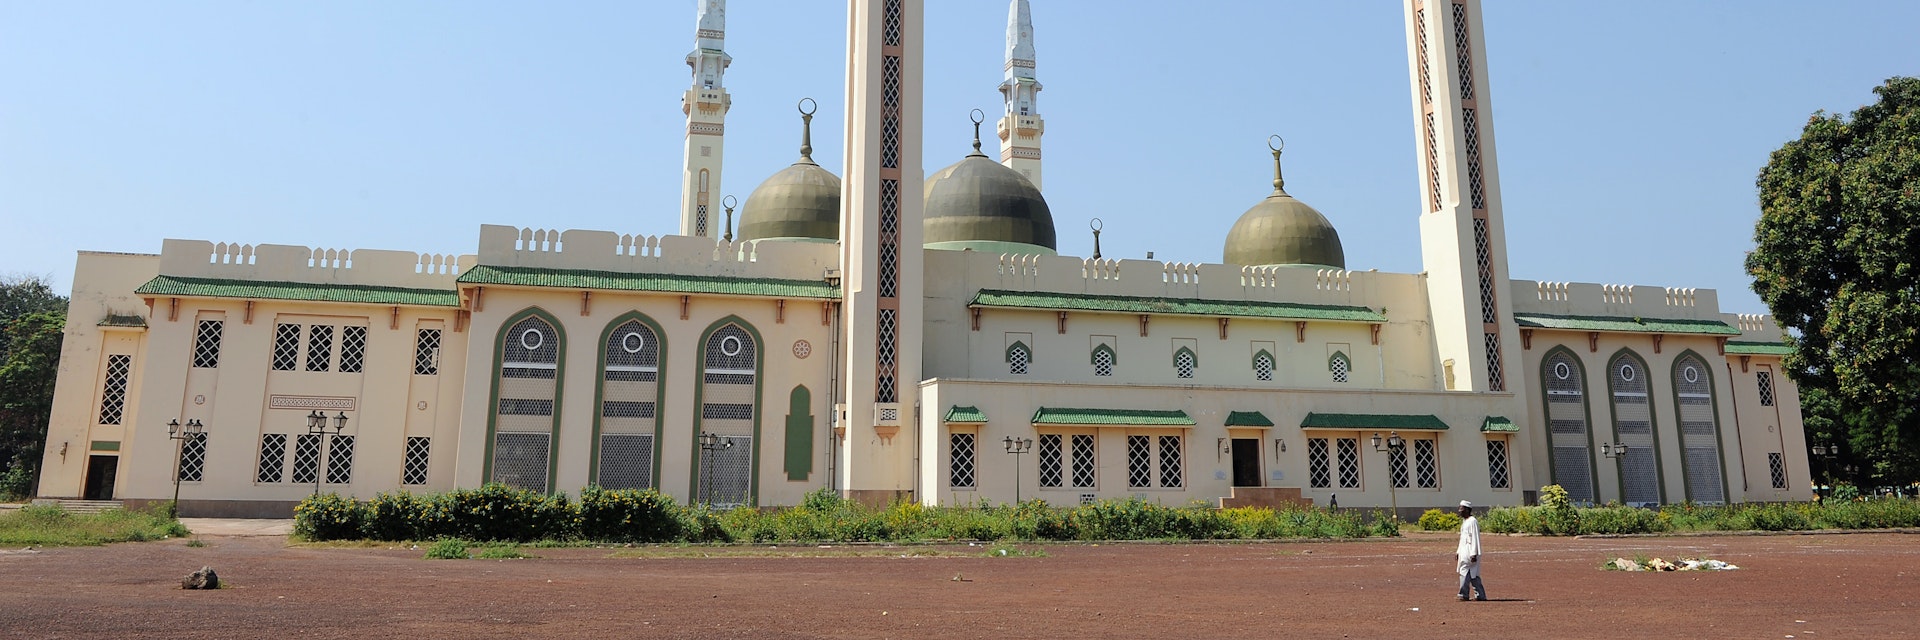 A man walks in front of the Great Mosque on December 2, 2010 in Conakry, as Guinea waited anxiously today for the Supreme Court to confirm presidential election results. Opposition leader Alpha Conde was announced the victor of Guinea's first democratic election since independence on November 15 with 52.5 percent of votes over rival Cellou Dalein Diallo who scored 47.5 percent, sparking accusations of voting fraud. AFP PHOTO / PASCAL GUYOT        (Photo credit should read PASCAL GUYOT/AFP/Getty Images)